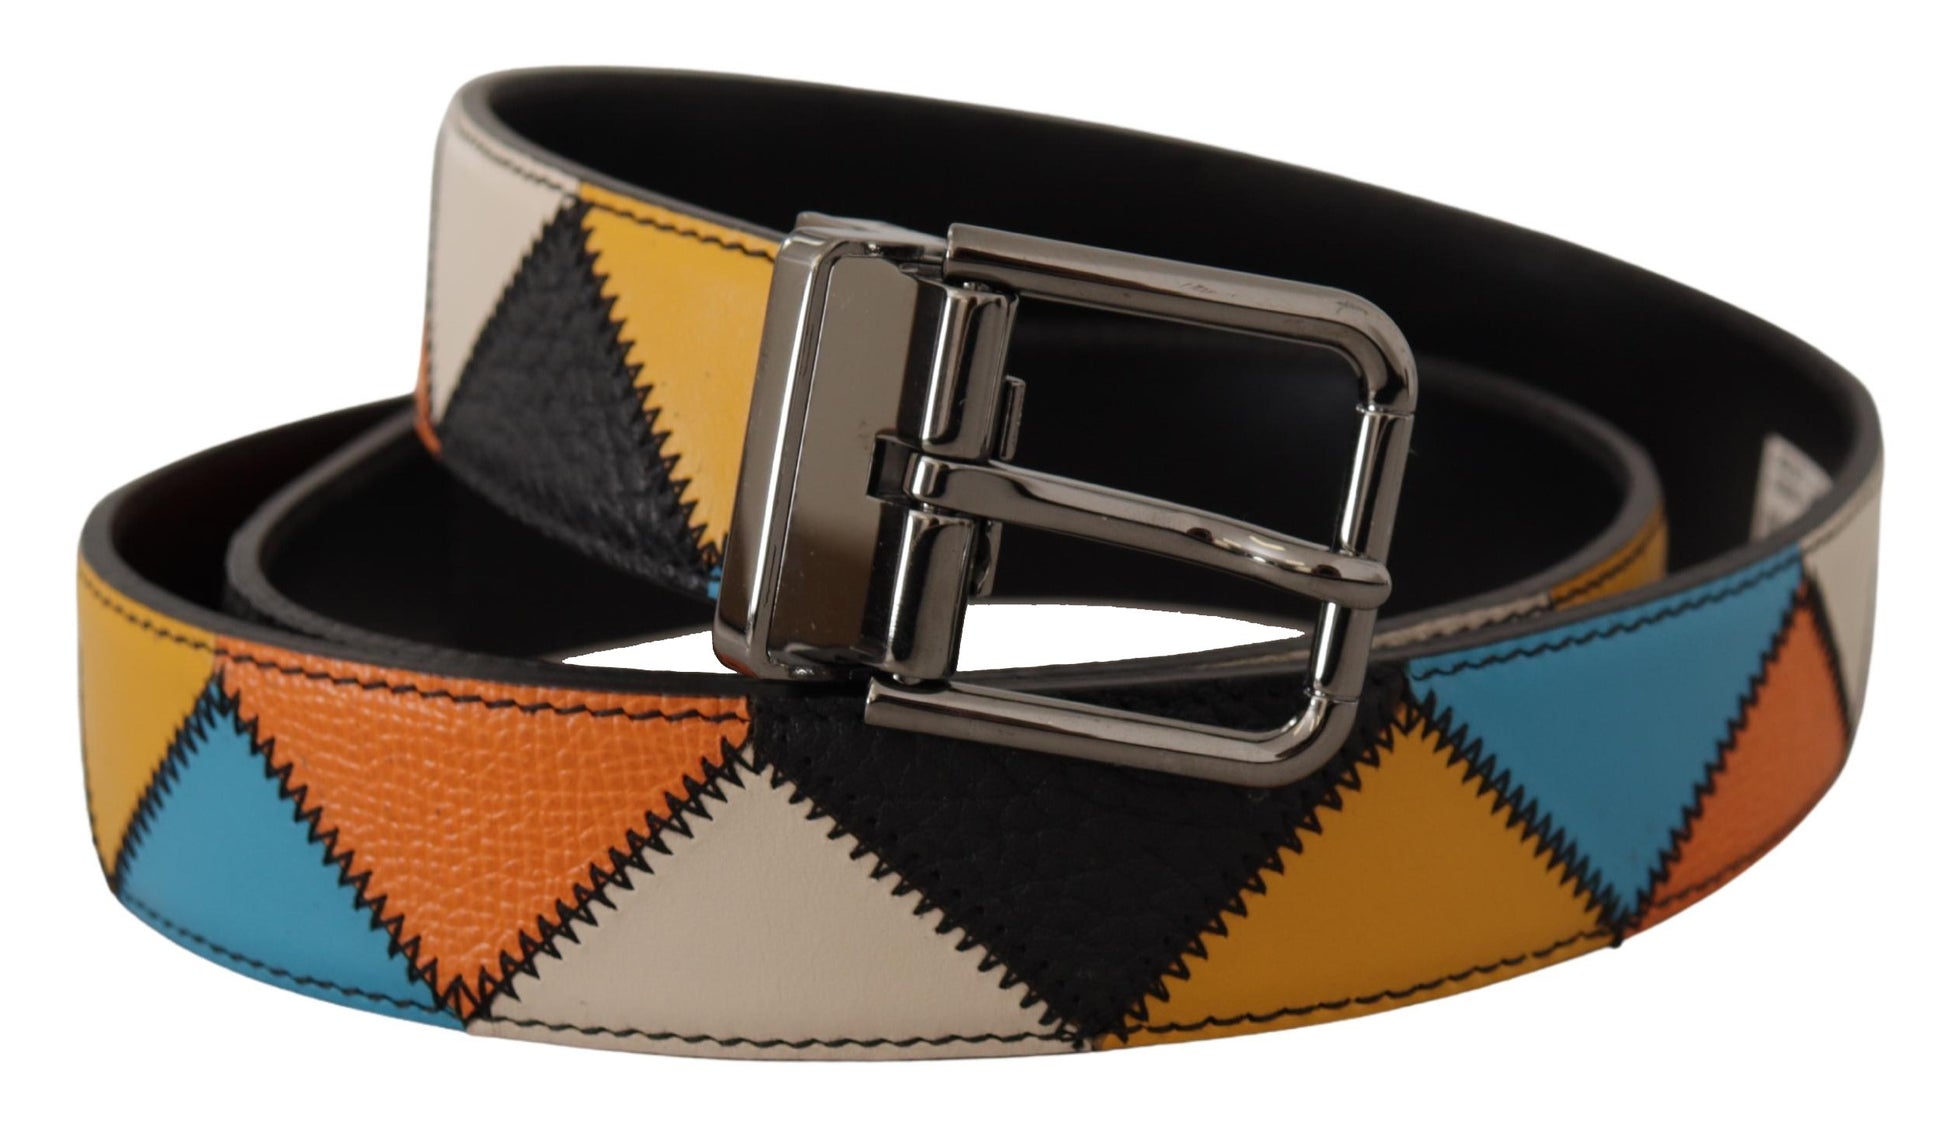 Dolce & Gabbana Multicolor Leather Belt with Silver Buckle | Fashionsarah.com